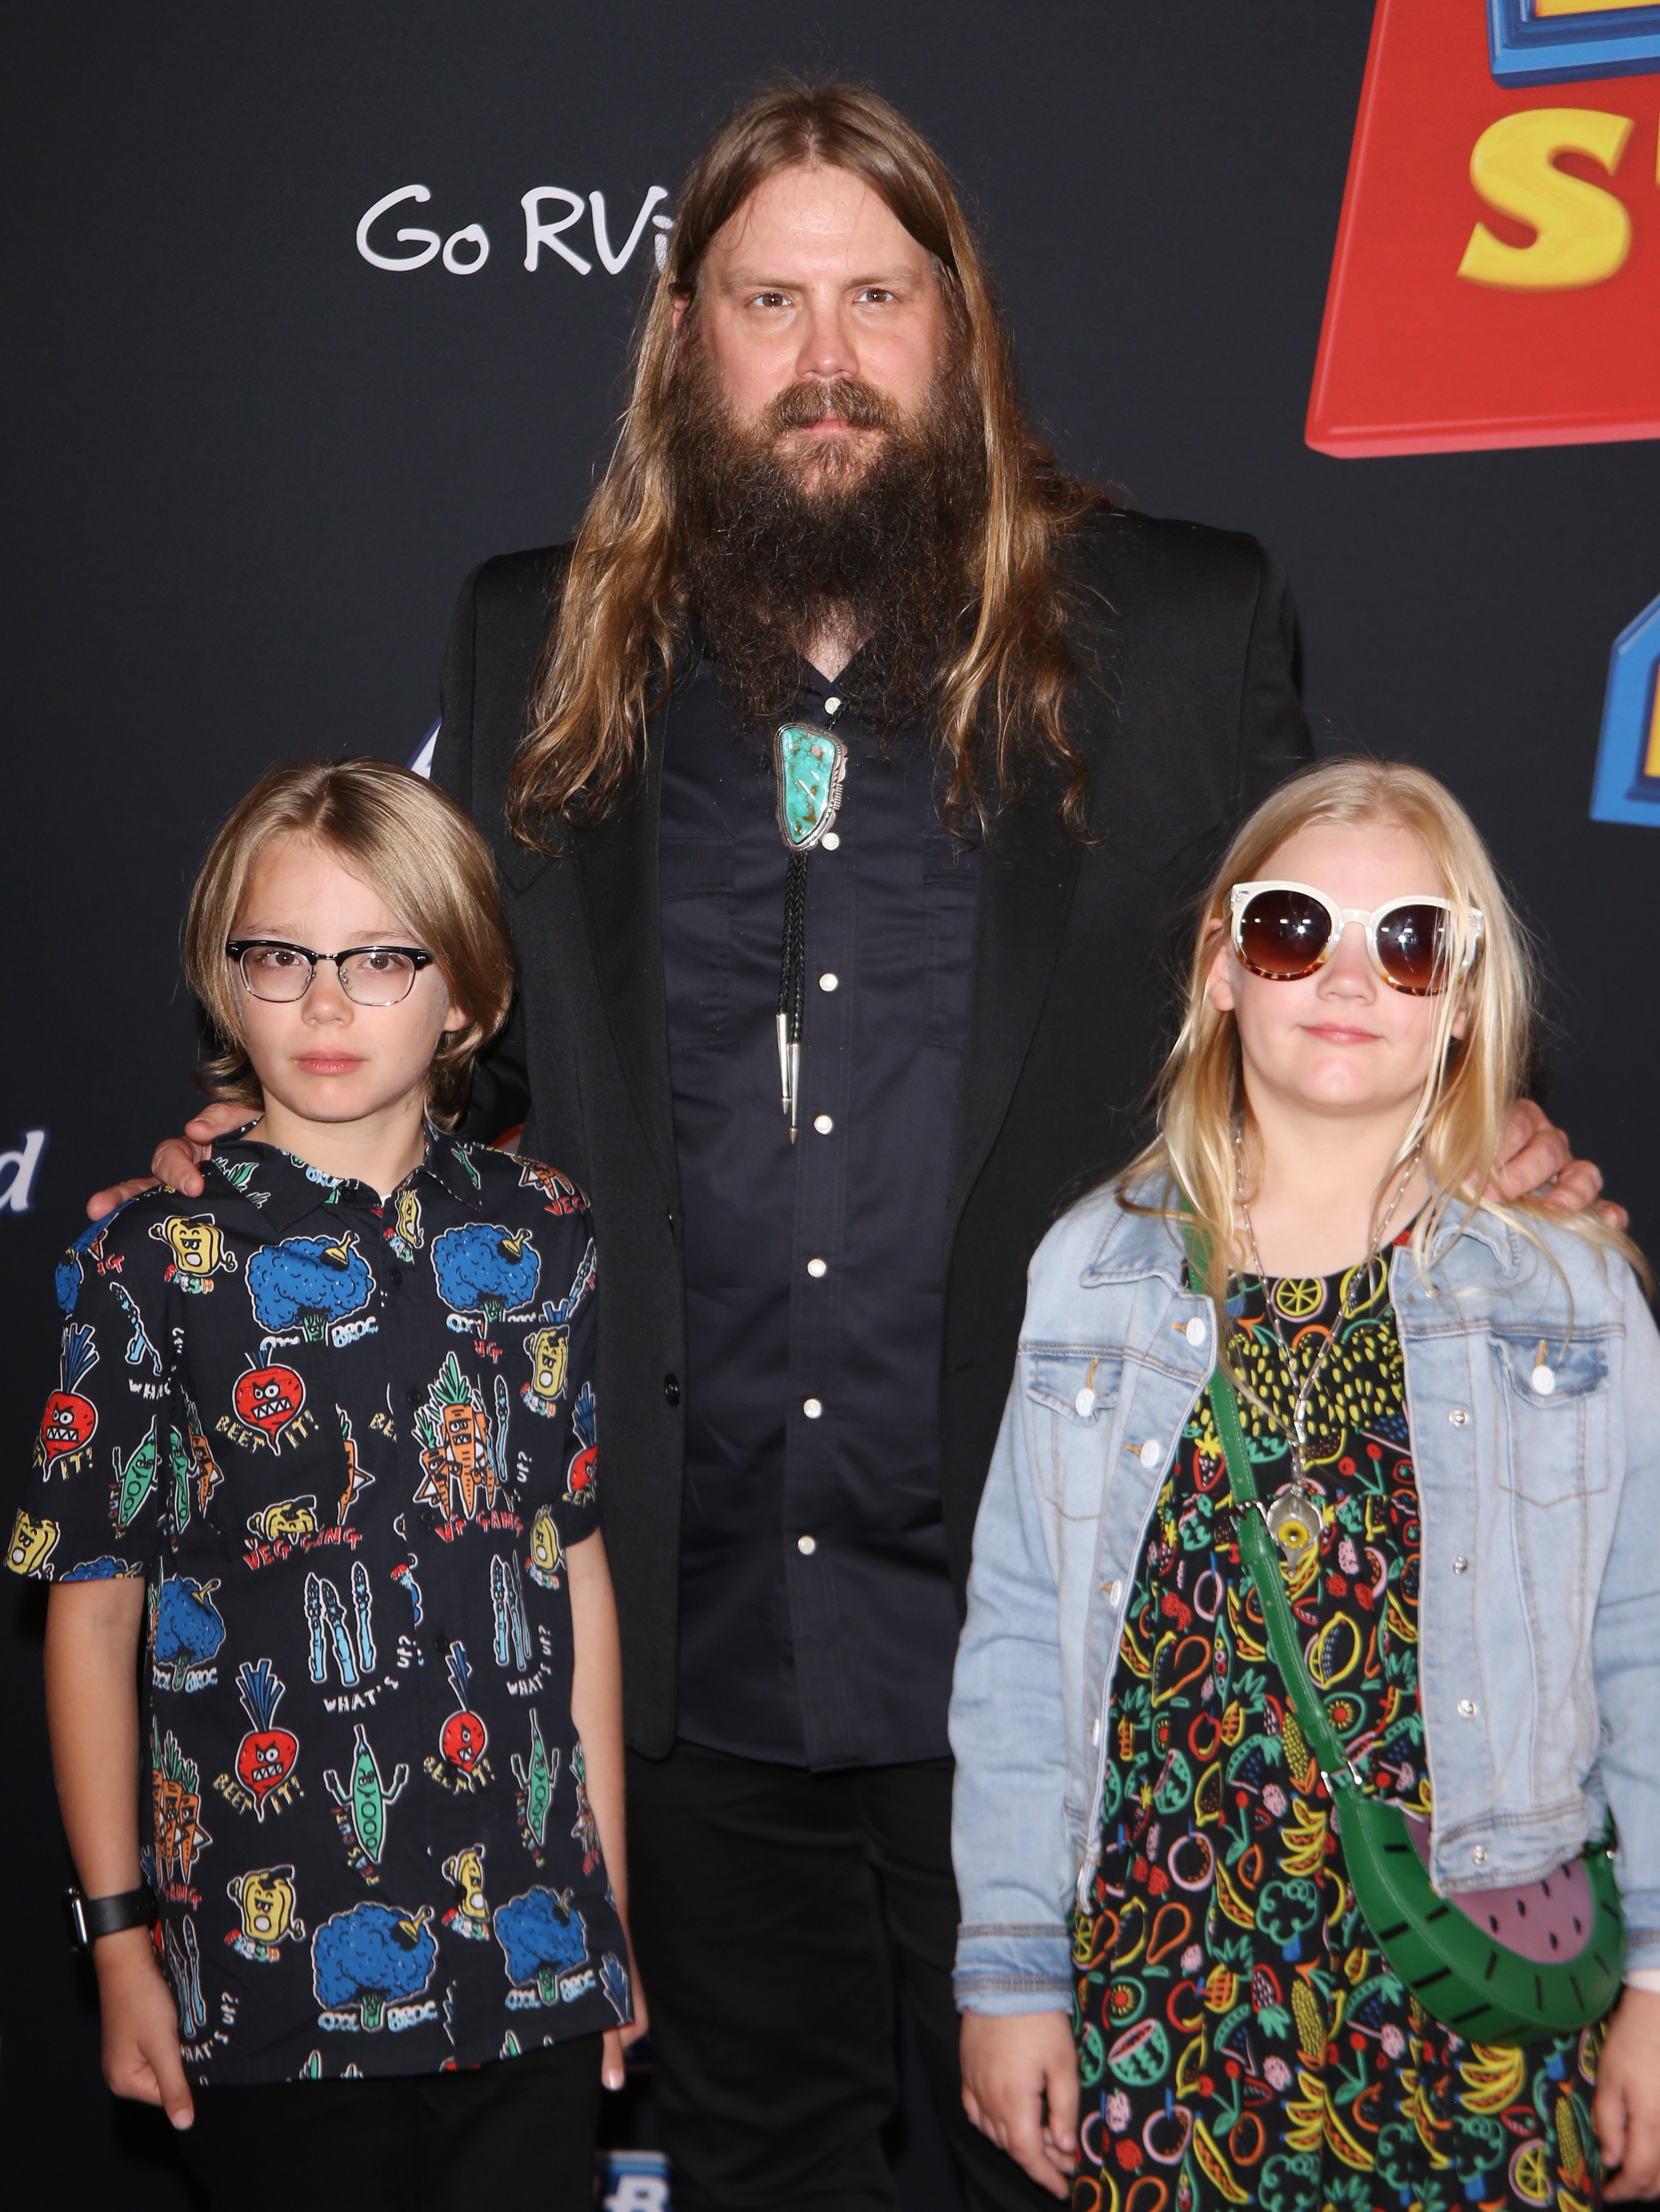 Chris Stapleton and his children are pictured at the Los Angeles premiere of Disney and Pixar's "Toy Story 4" held on June 11, 2019, in Los Angeles, California | Source: Getty Images